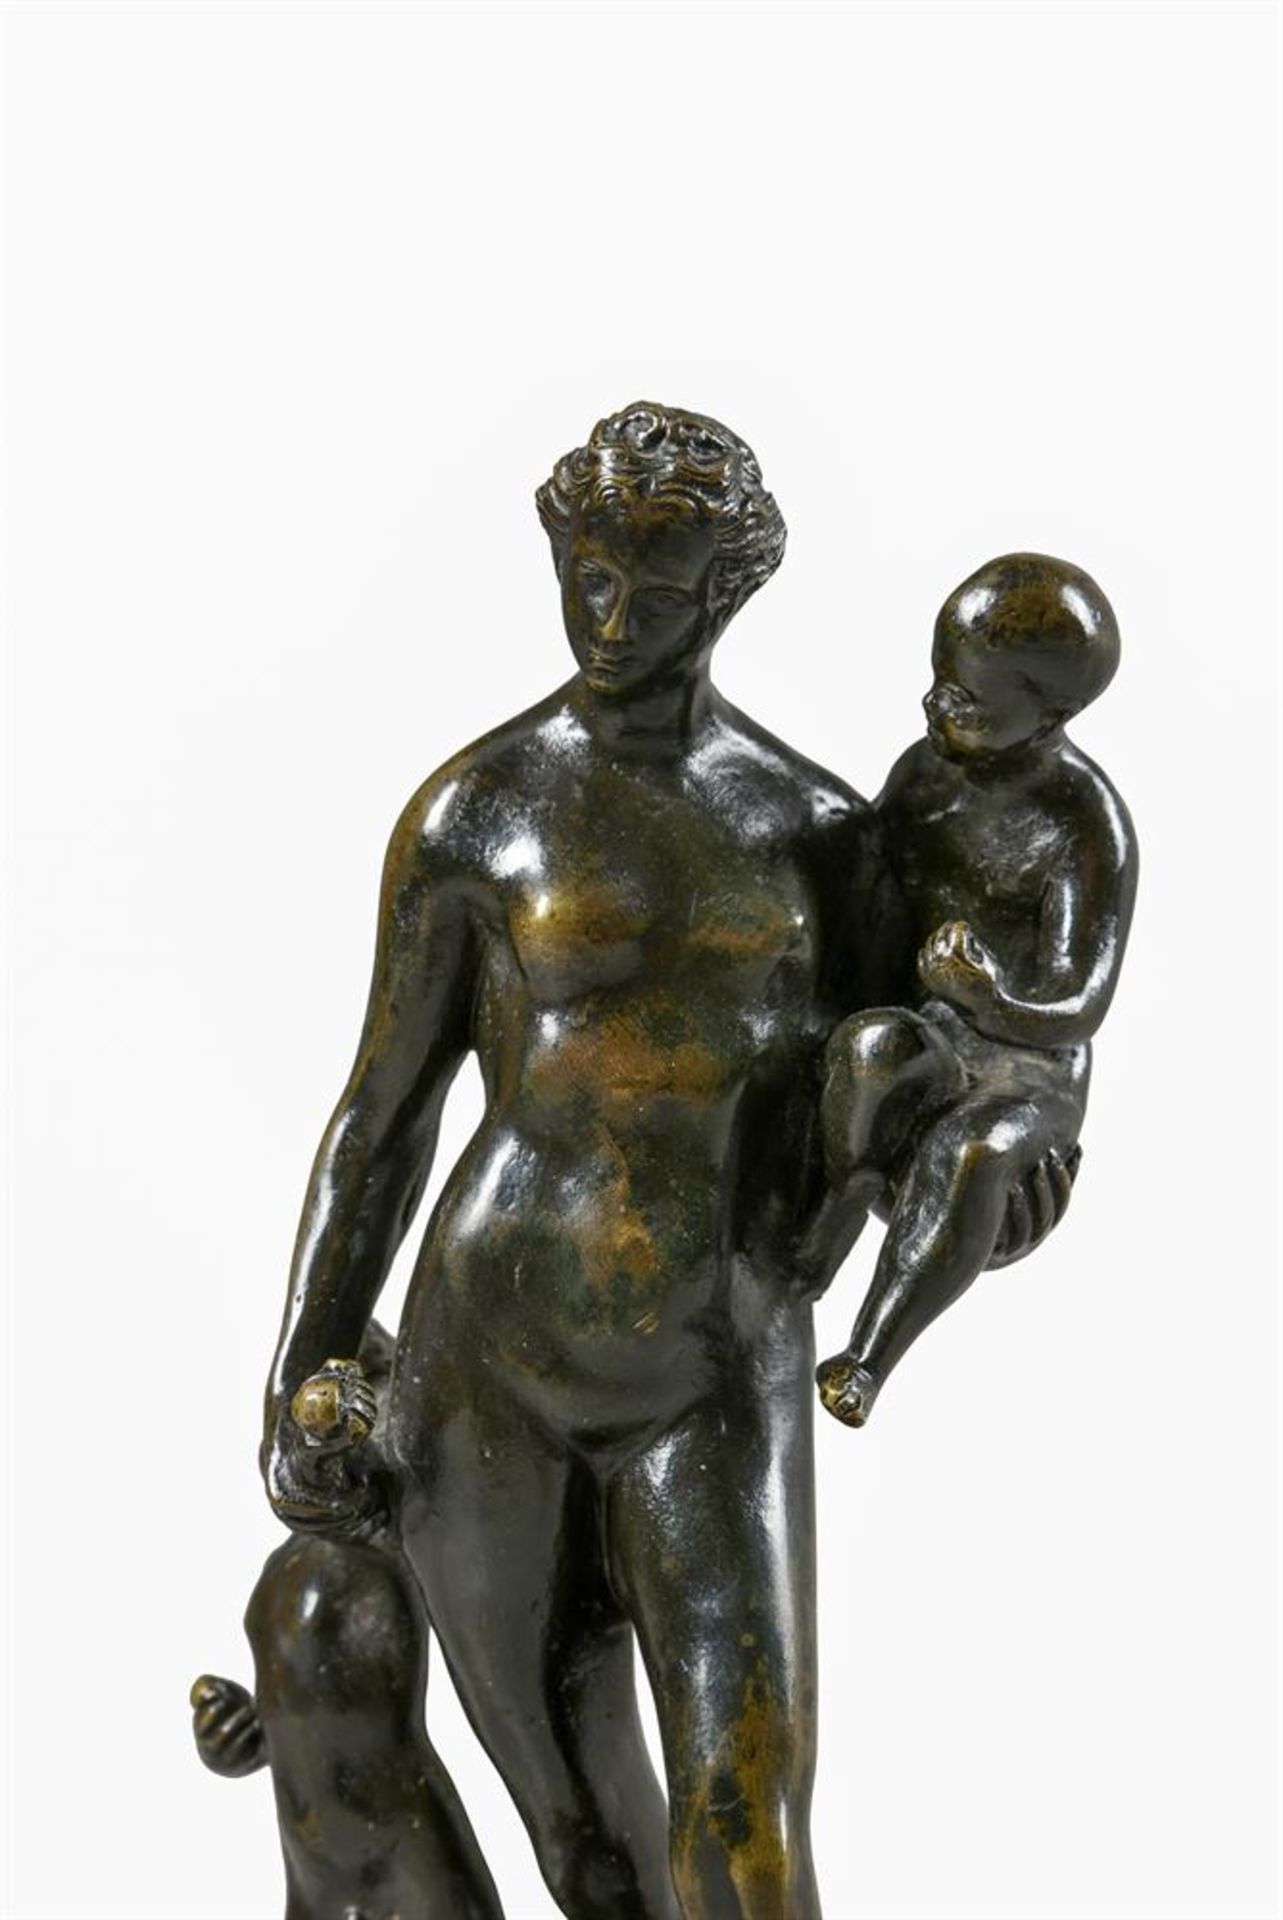 A BRONZE ALLEGORICAL GROUP EMBLEMATIC OF CHARITY, PROBABLY DUTCH, 17TH CENTURY - Image 4 of 4